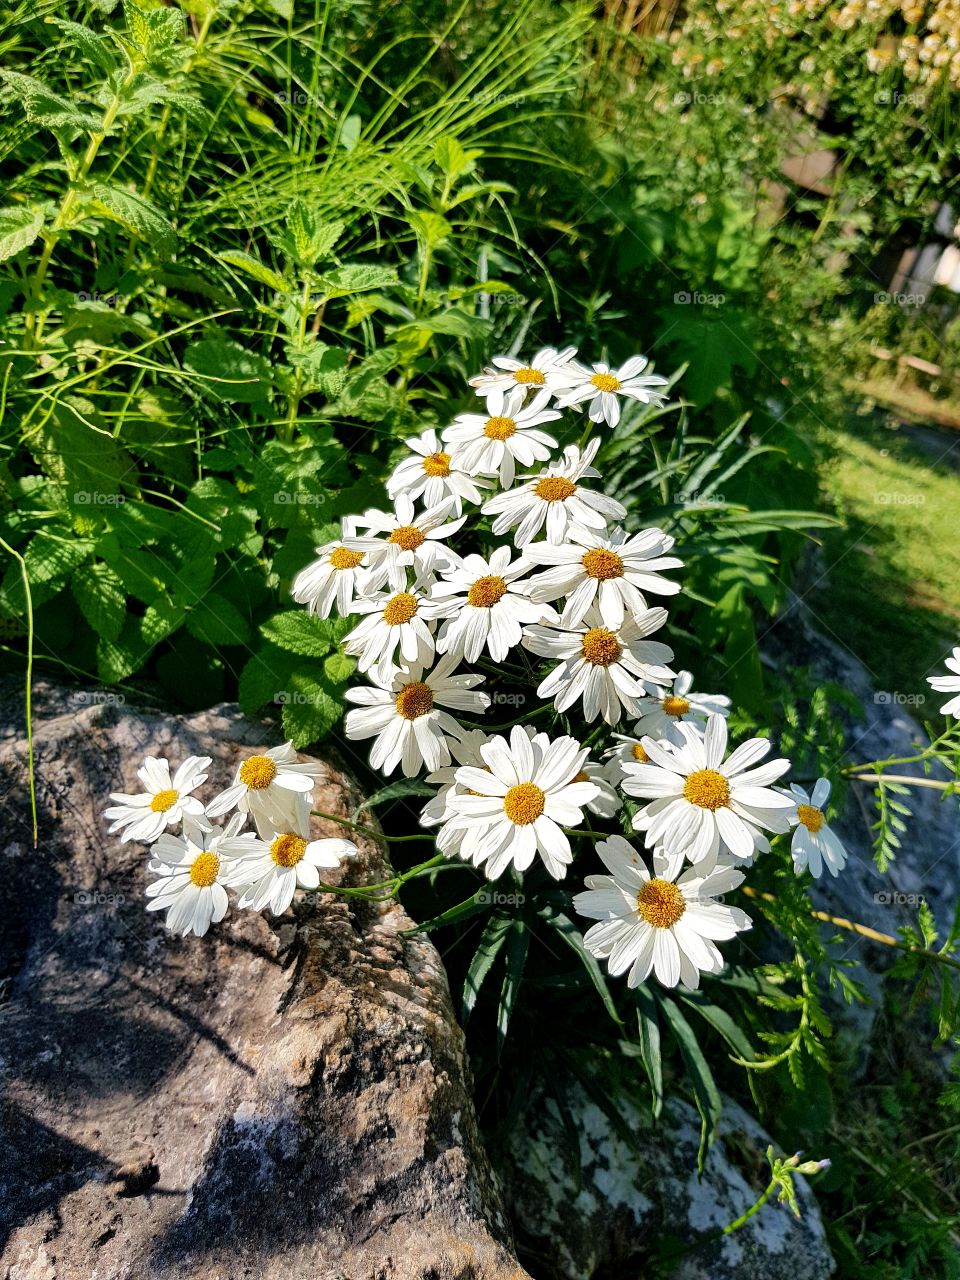 flowers and summer time 🌼🌼🌼🌼🌼🌞🌞🌞🌞🌞